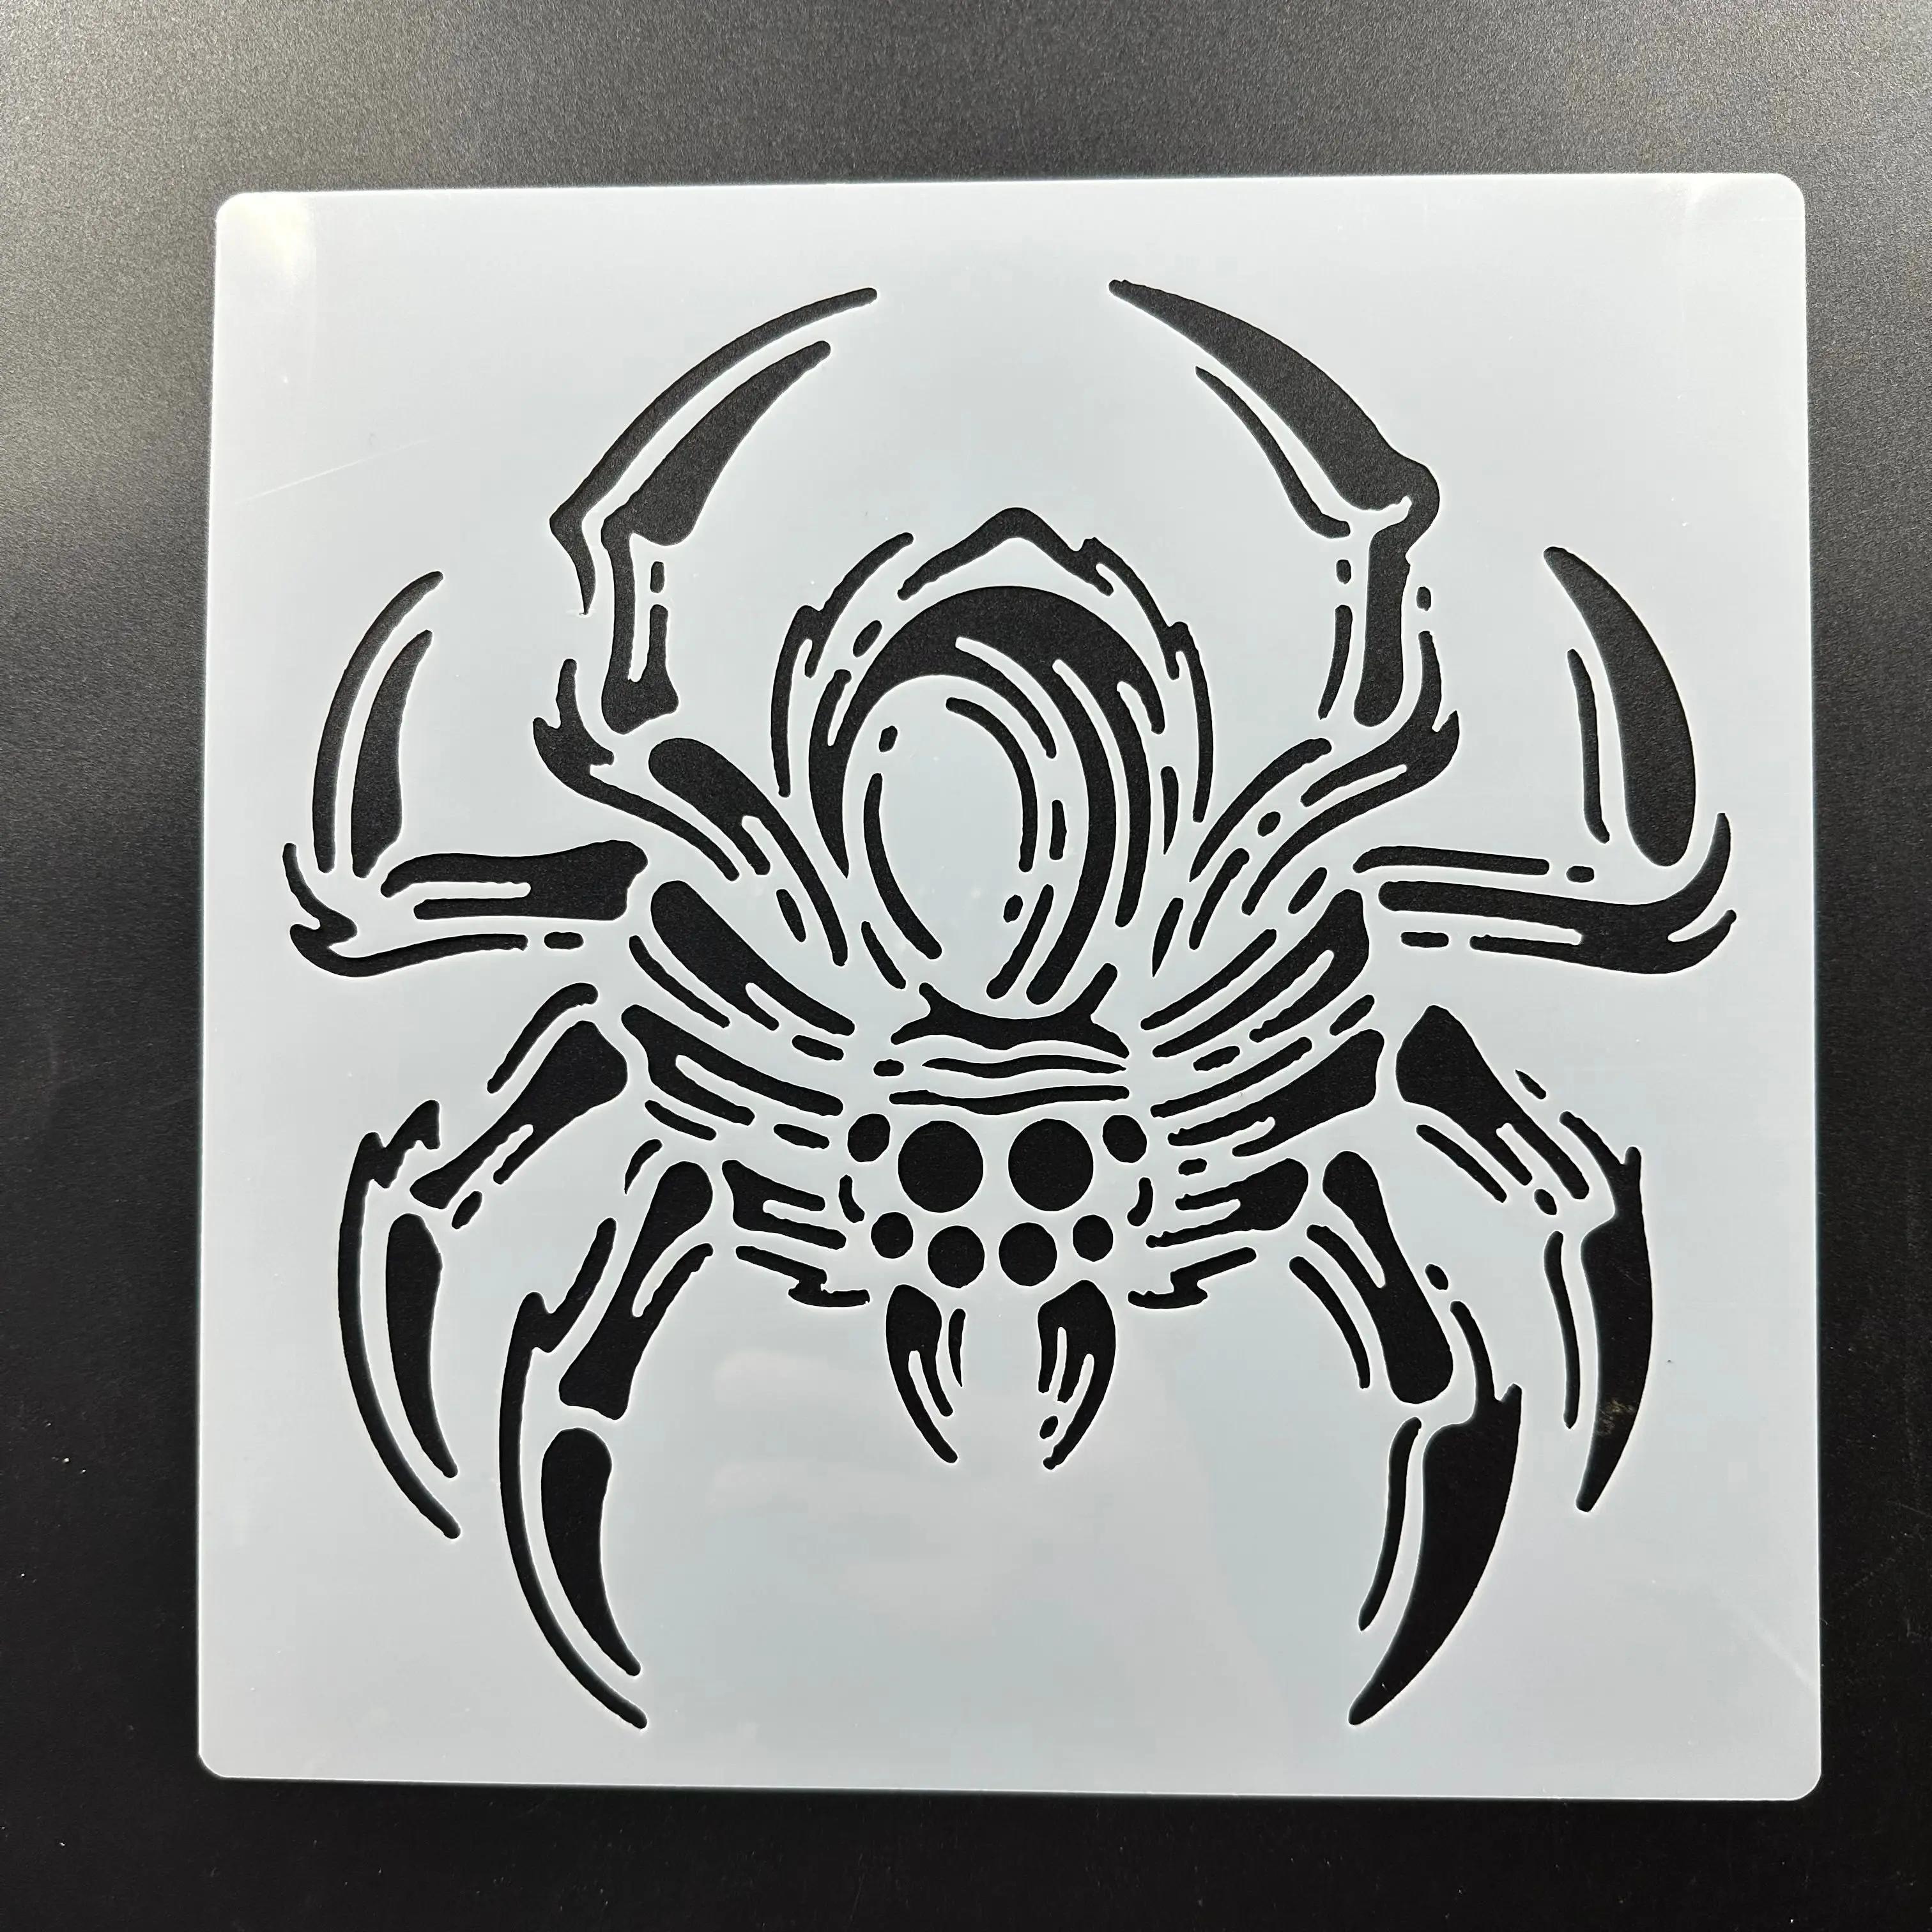 20 *20 cm Spider DIY  mandala mold for painting stencils stamped photo album embossed paper card on wood, fabric, wa